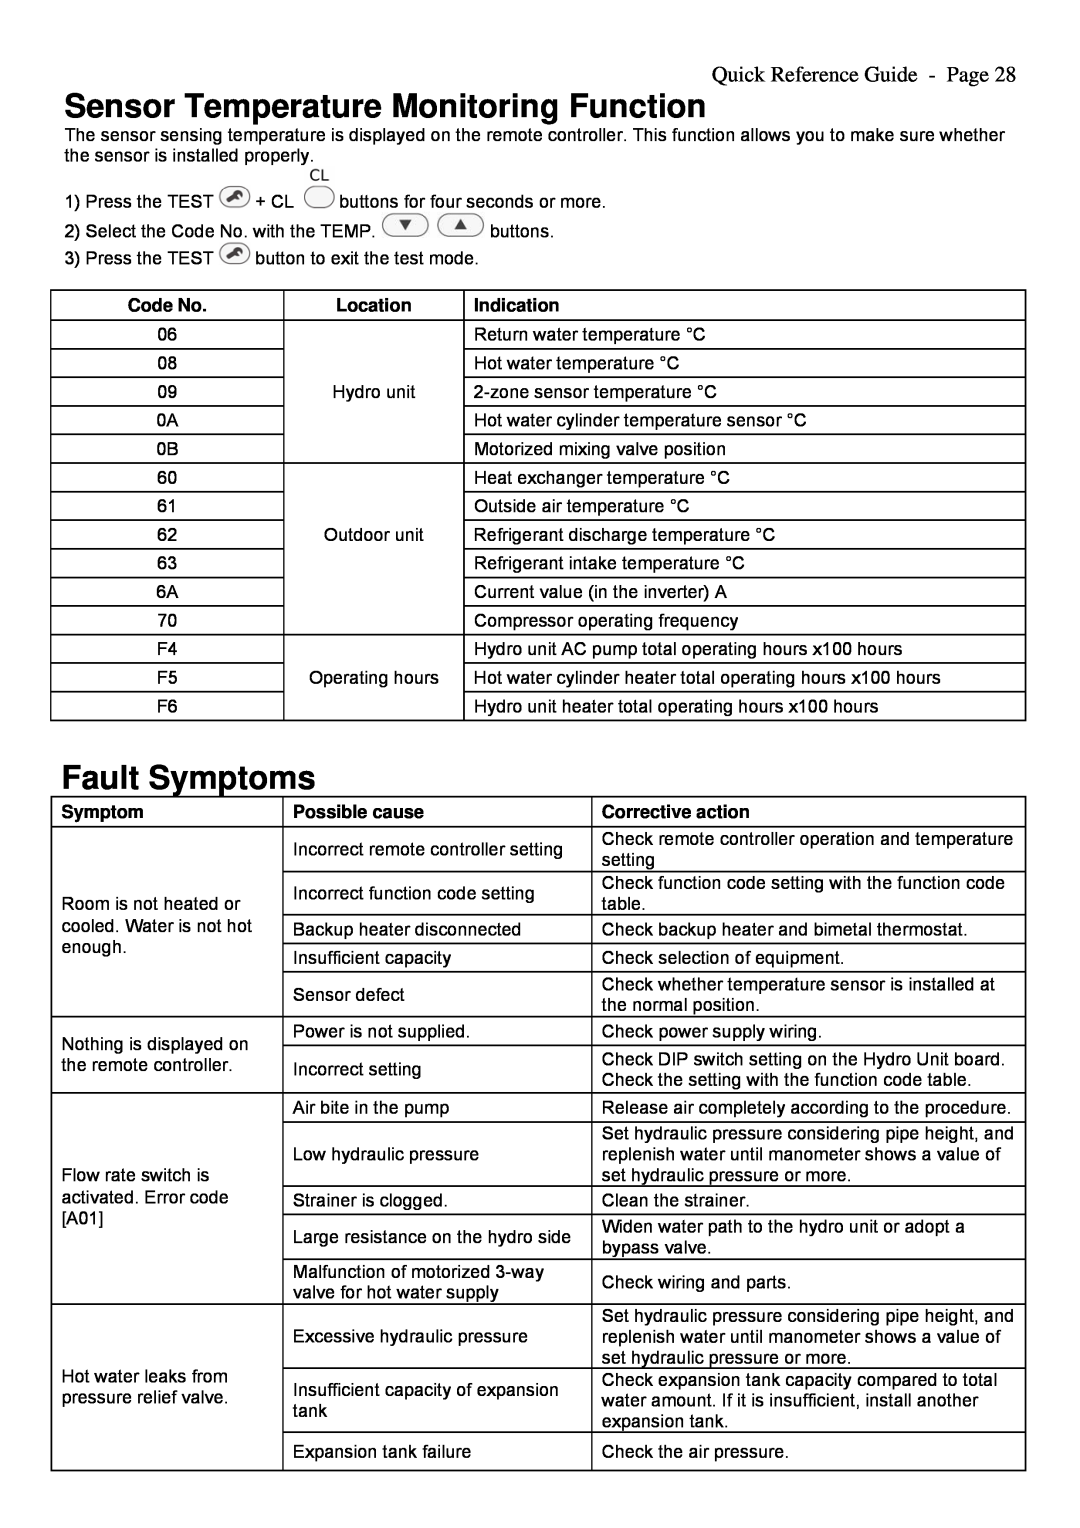 Toshiba A09-01P Sensor Temperature Monitoring Function, Fault Symptoms, Quick Reference Guide - Page, Code No, Location 